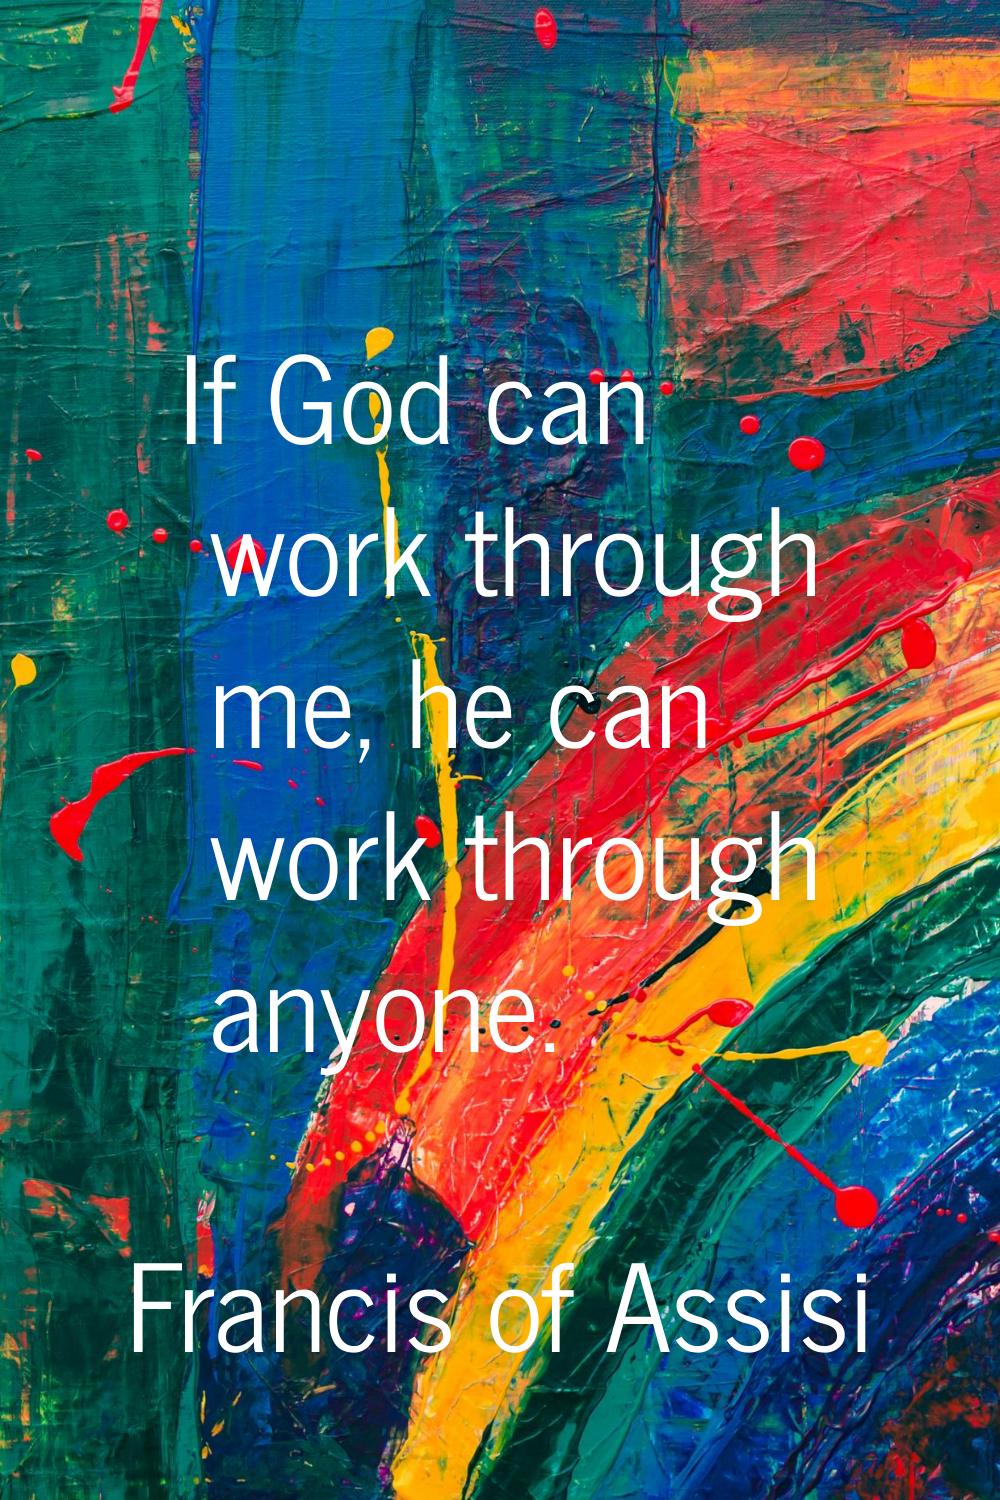 If God can work through me, he can work through anyone.